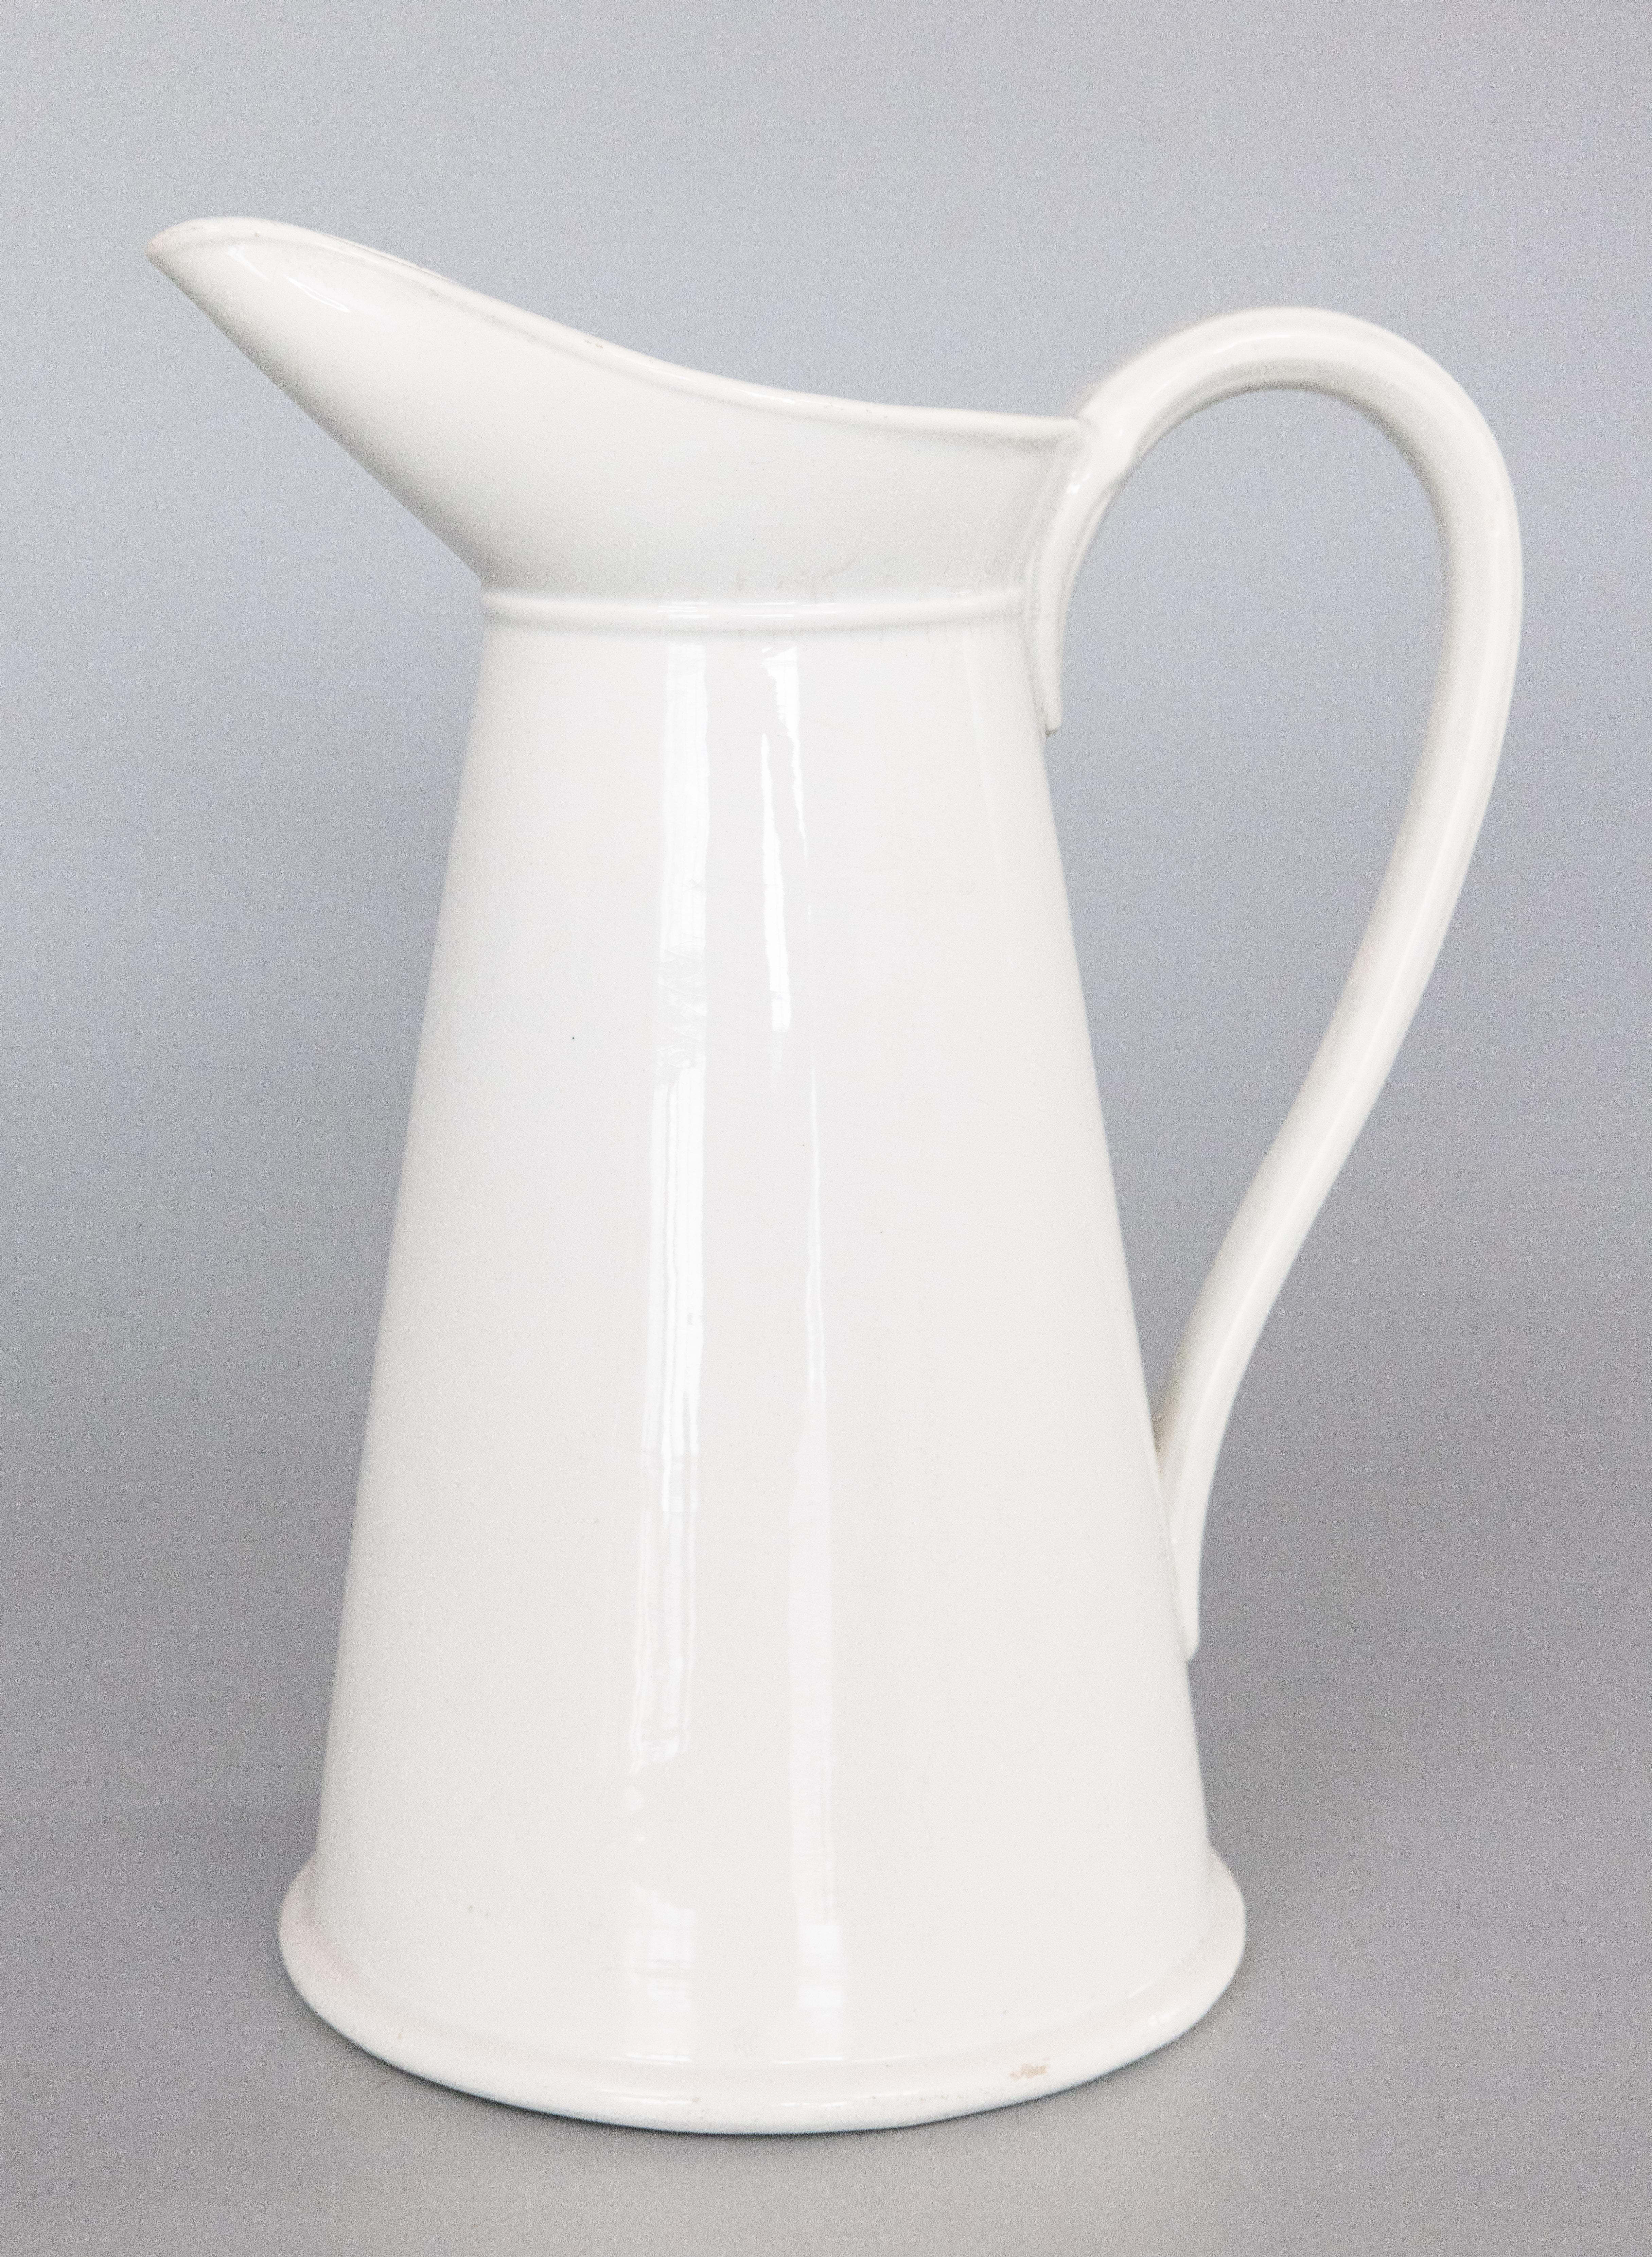 A lovely large antique French white ironstone pitcher, circa 1880. Made in France by the famous Hautin Boulenger & Cie earthenware factory located in Choisy le Roi, France. Signed on reverse. This fine quality pitcher is a nice large size measuring